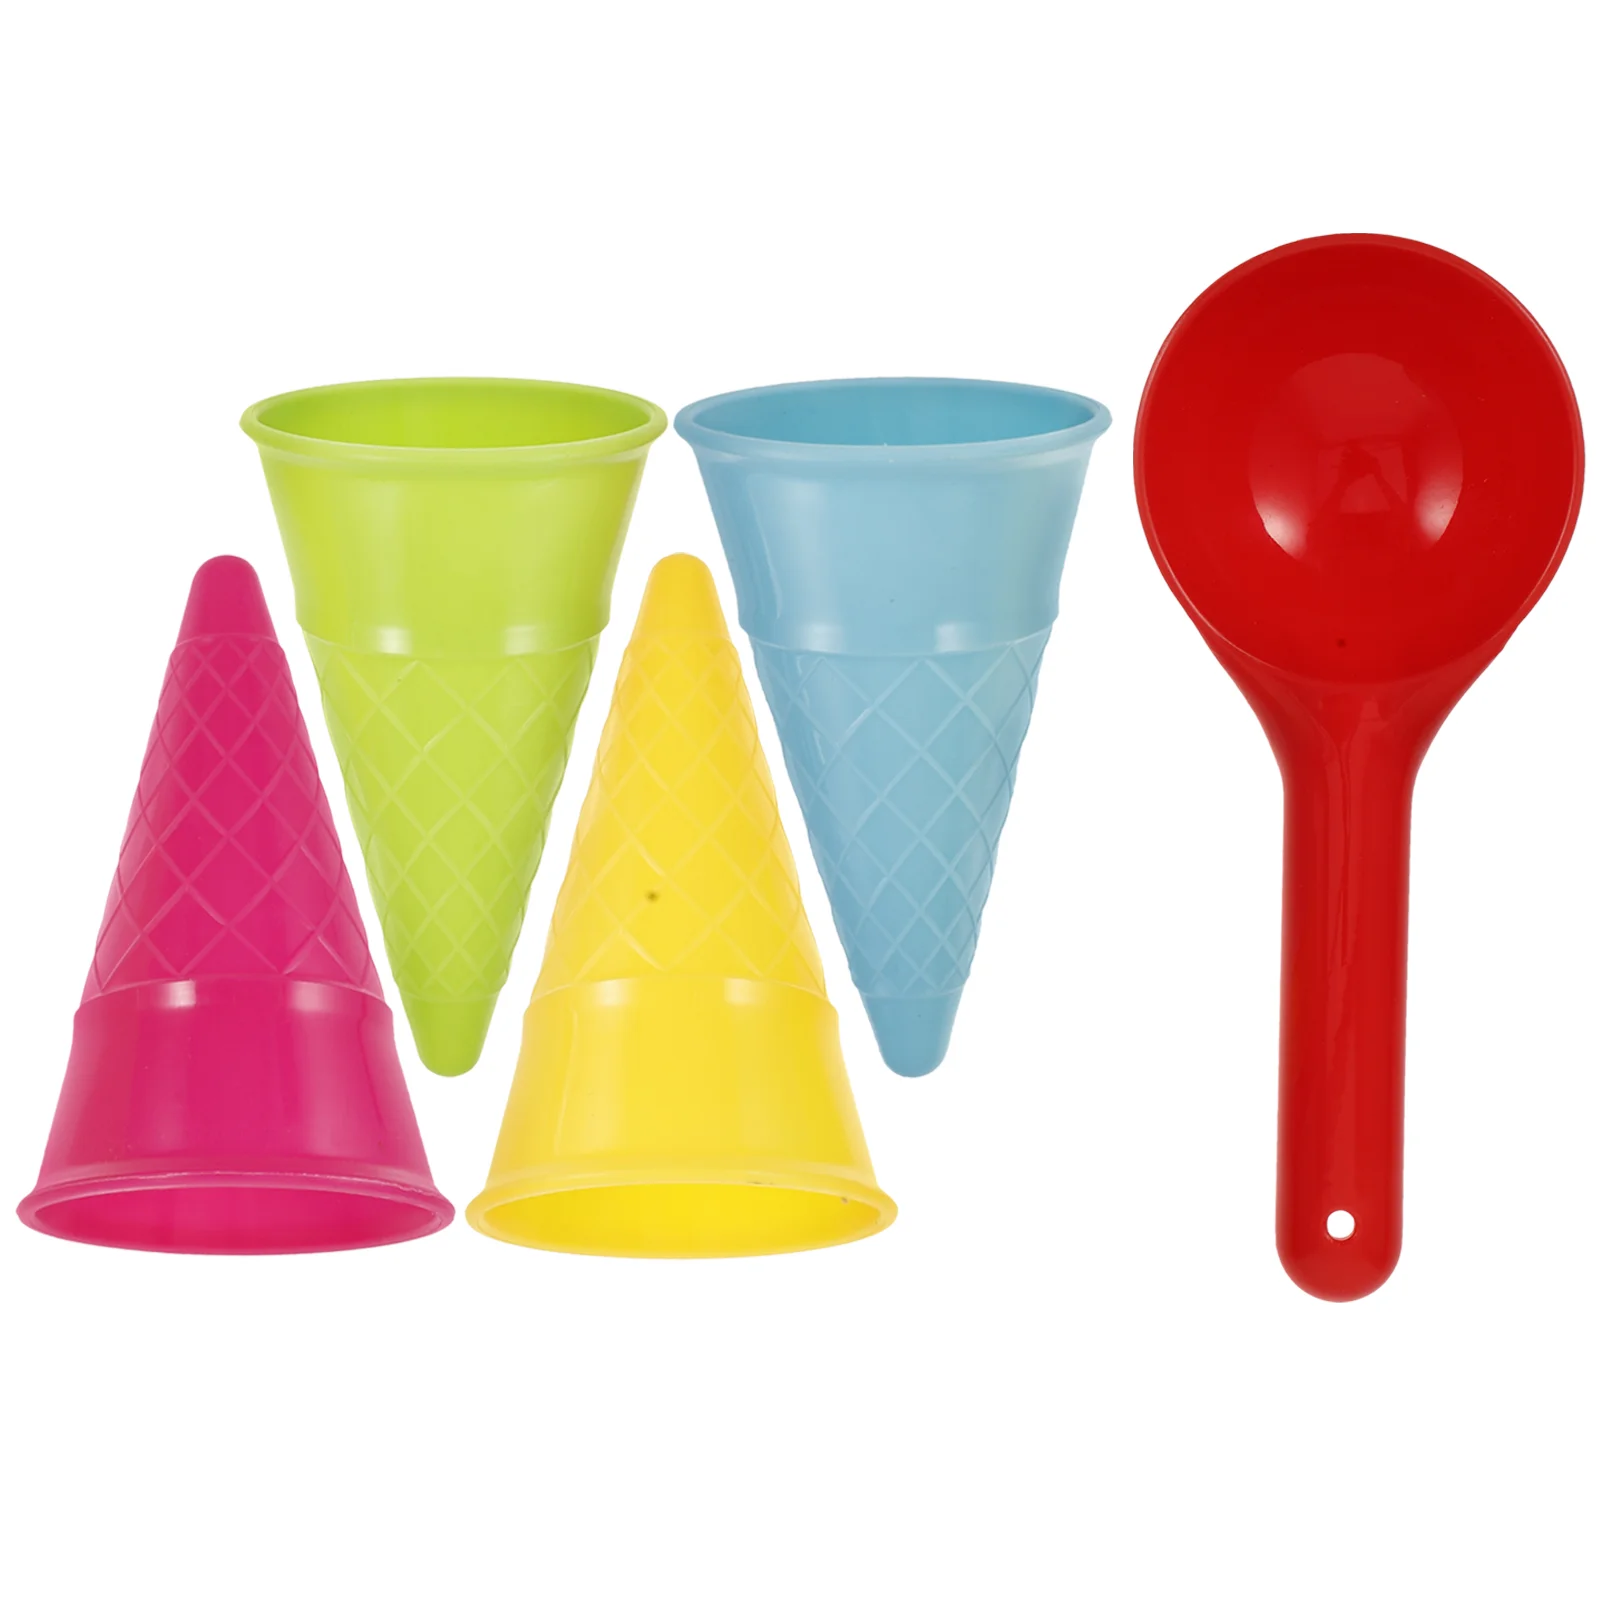 

Sand Ice Cream Toys Beach Toy Kids Play Scoop Cone Mold Set Plastic Cones Molds Pretend Sandbox Playset Summer Cup Castle